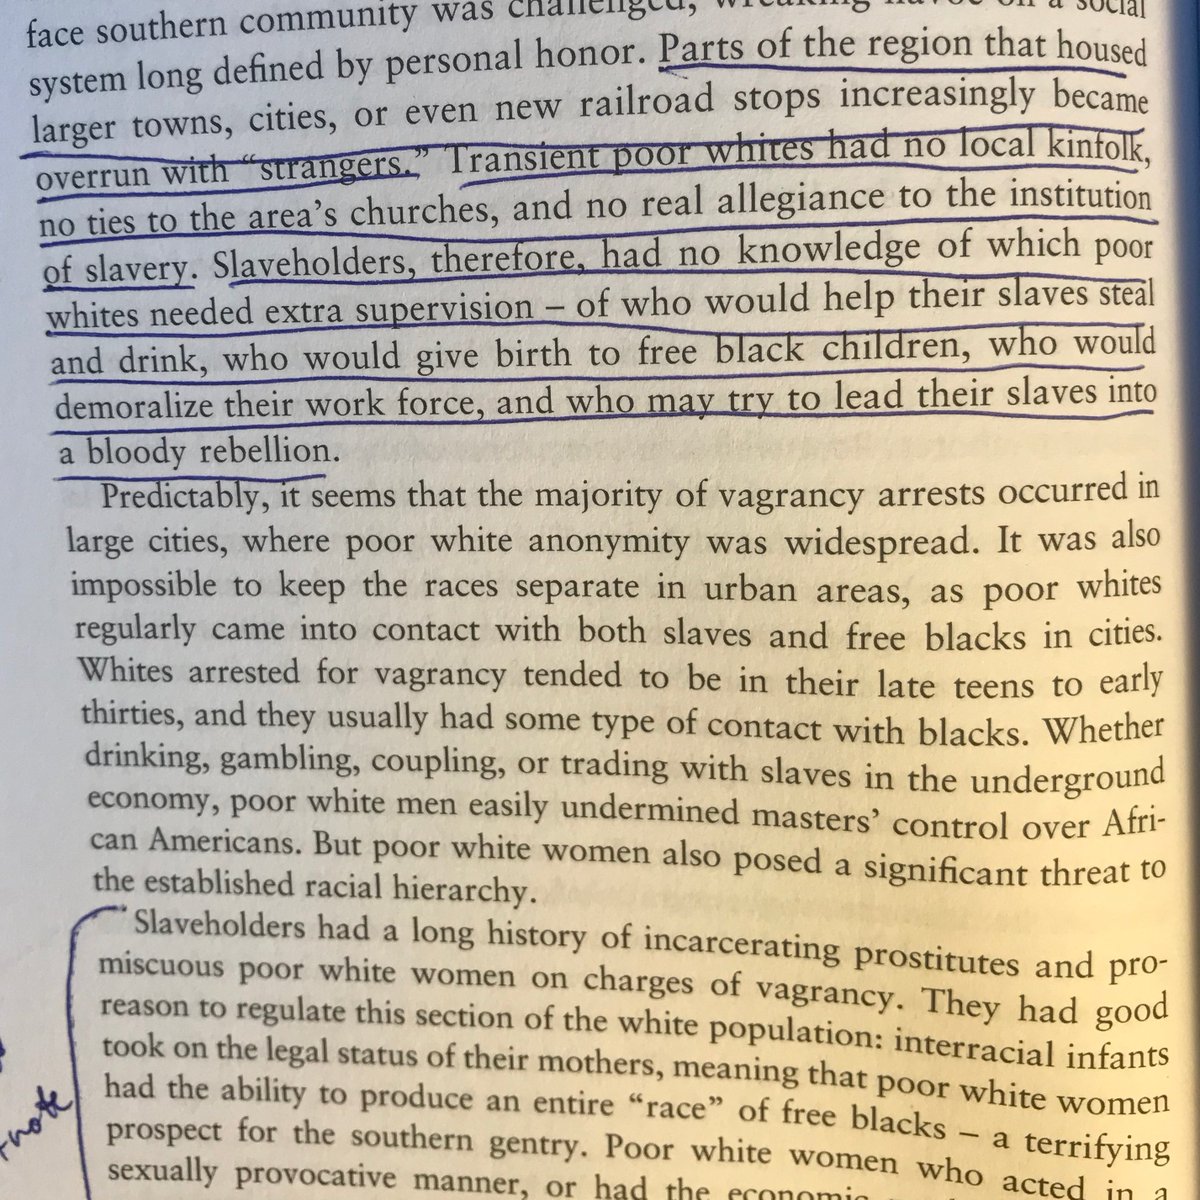 Even though abolitionists weren't orchestrating the Southern unrest, it's important to understand that many slave uprisings really did include small numbers of poor whites who saw more in common with their black neighbors than the slave owning class.